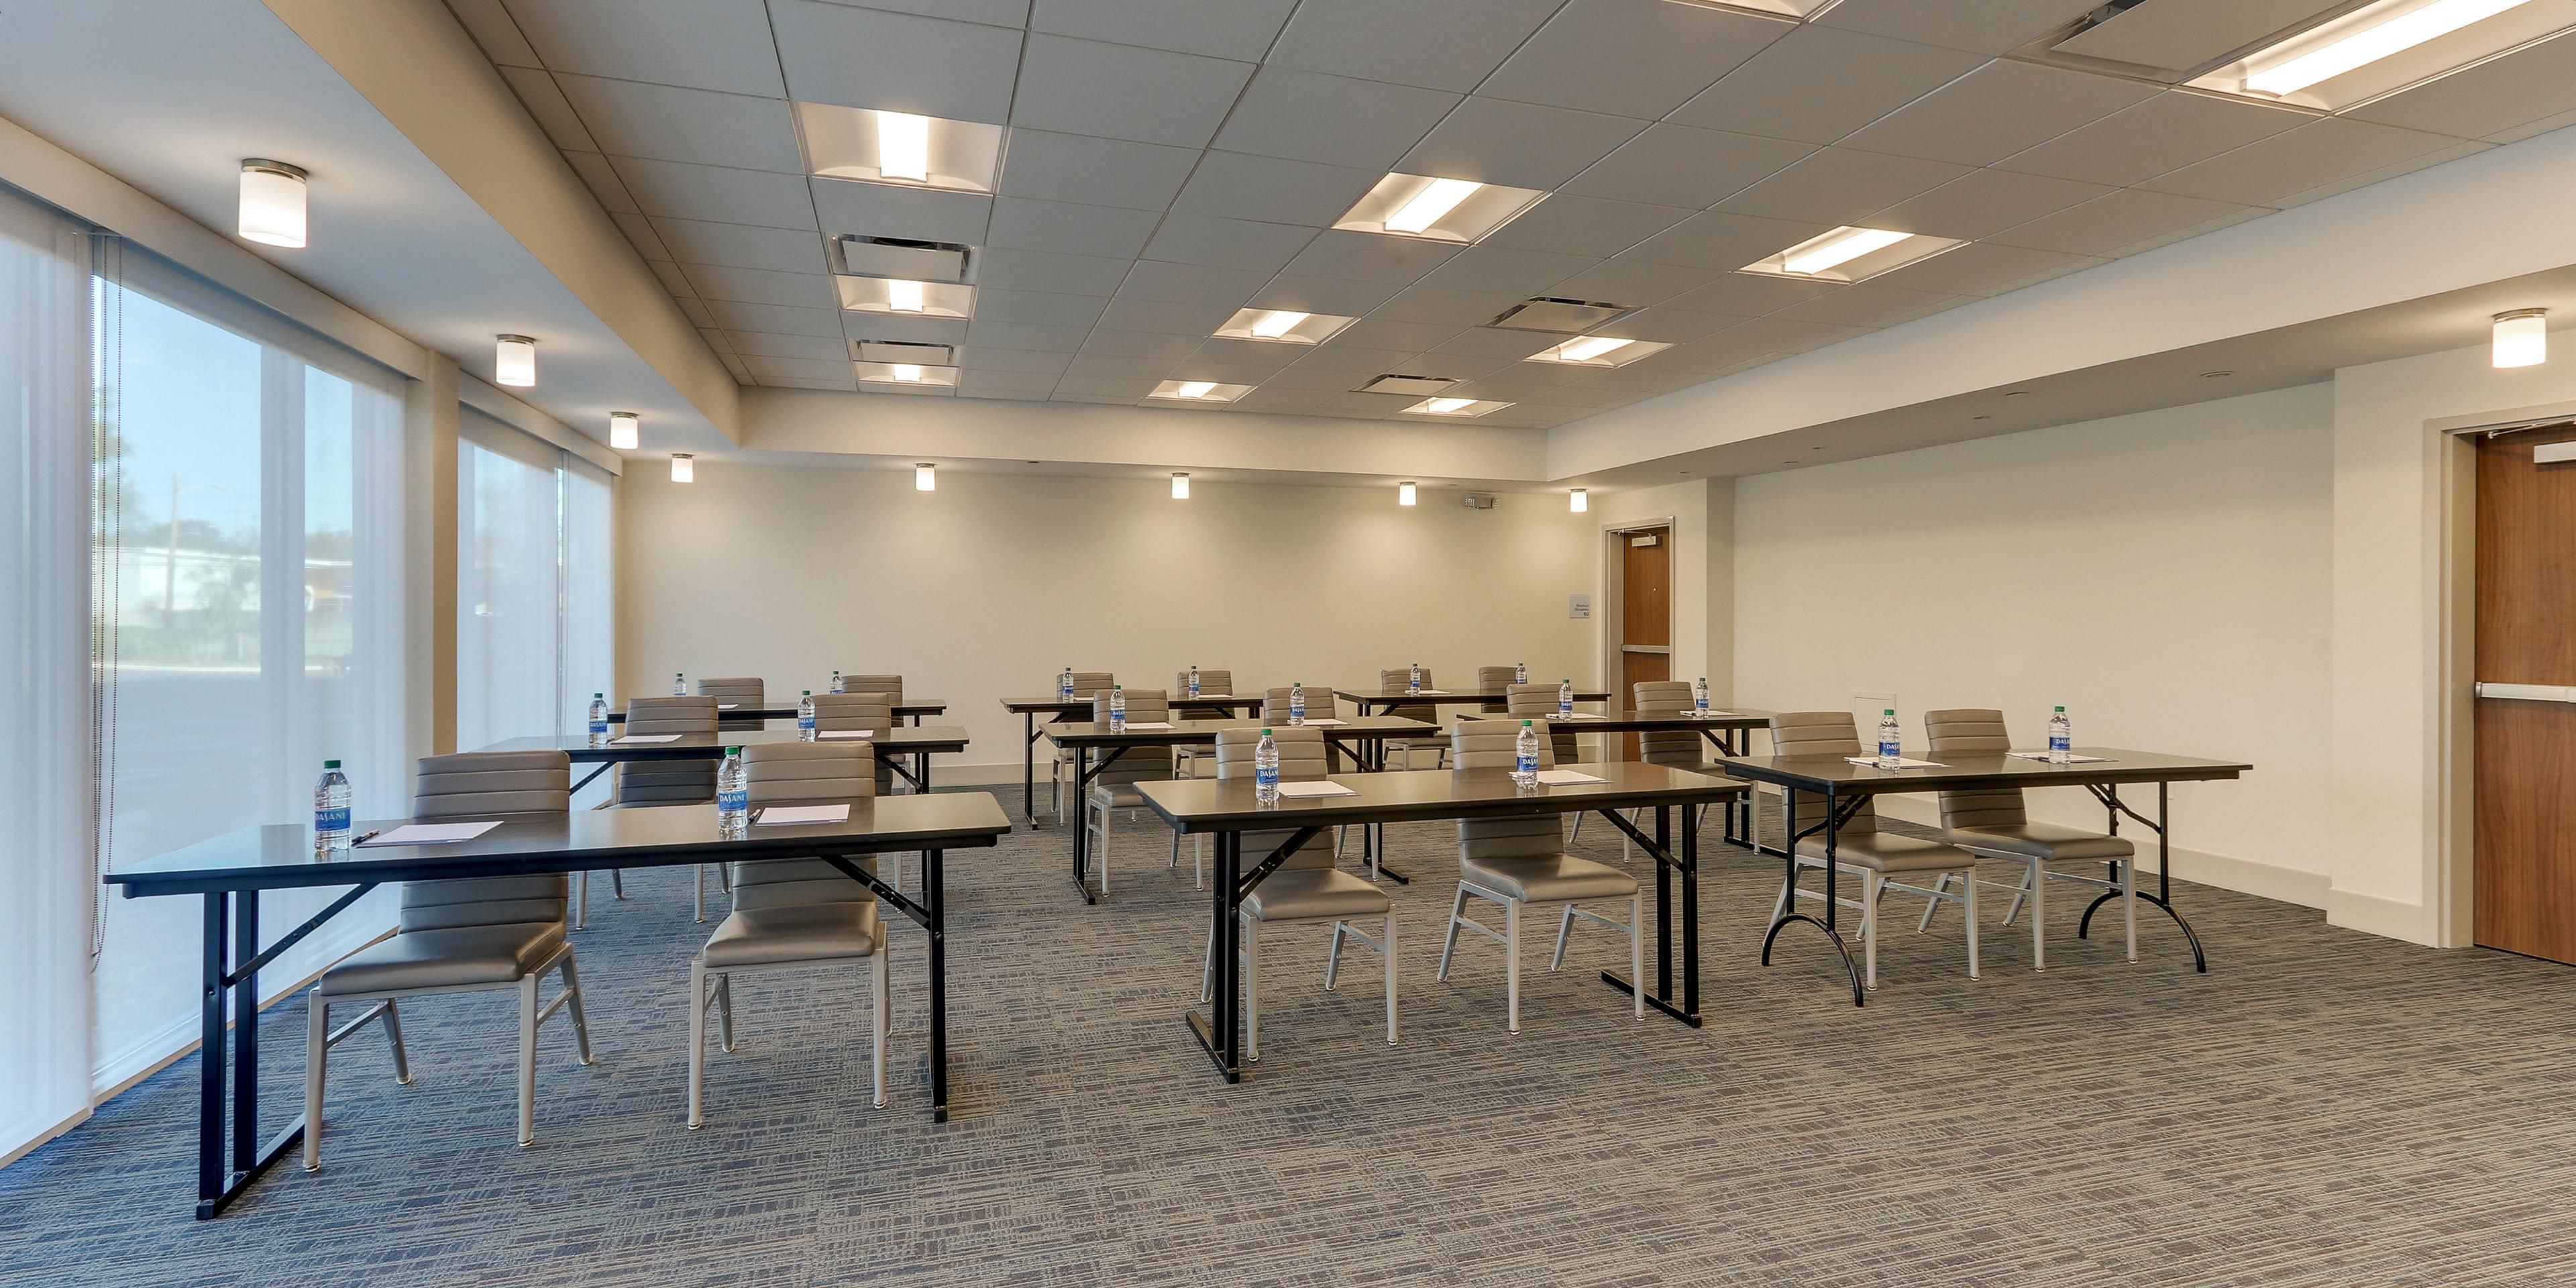 Experience our versatile meeting space for your next event.  Perfect for small to medium sized groups.  We also offer great group discounts. Our hotel is perfect for all types of groups including sports teams, corporate groups, family reunions, and weddings. Call us for more information.